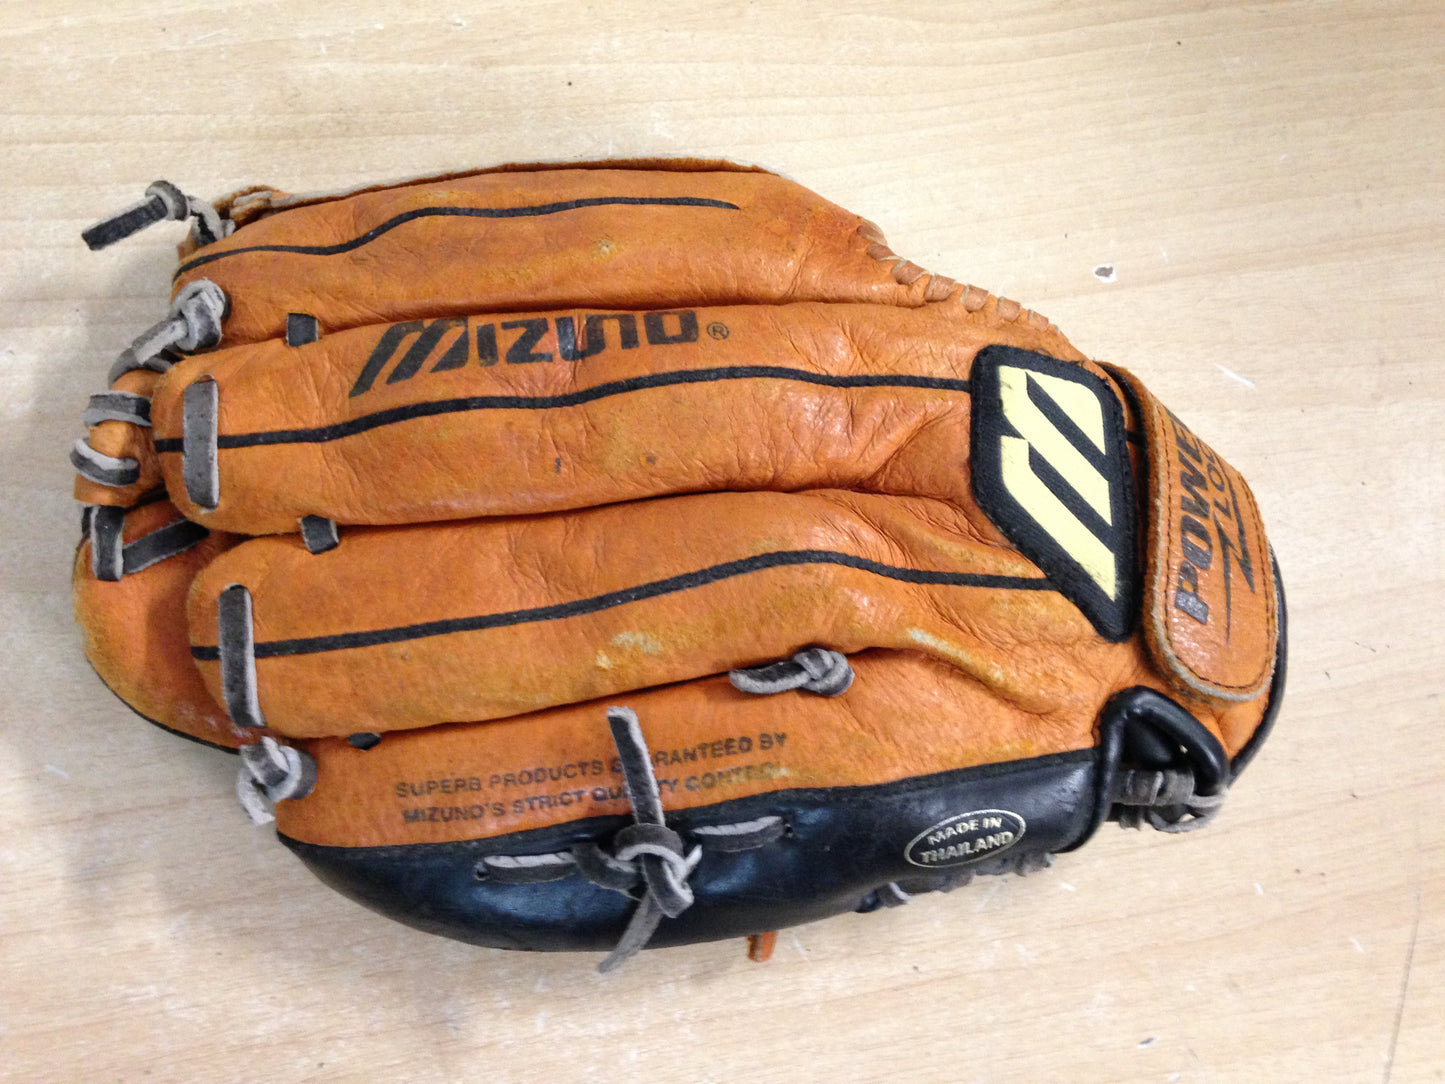 Baseball Glove Adult Size 11.5 inch Mizuno Max Flex Soft Brown Leather  Fits on Left Hand